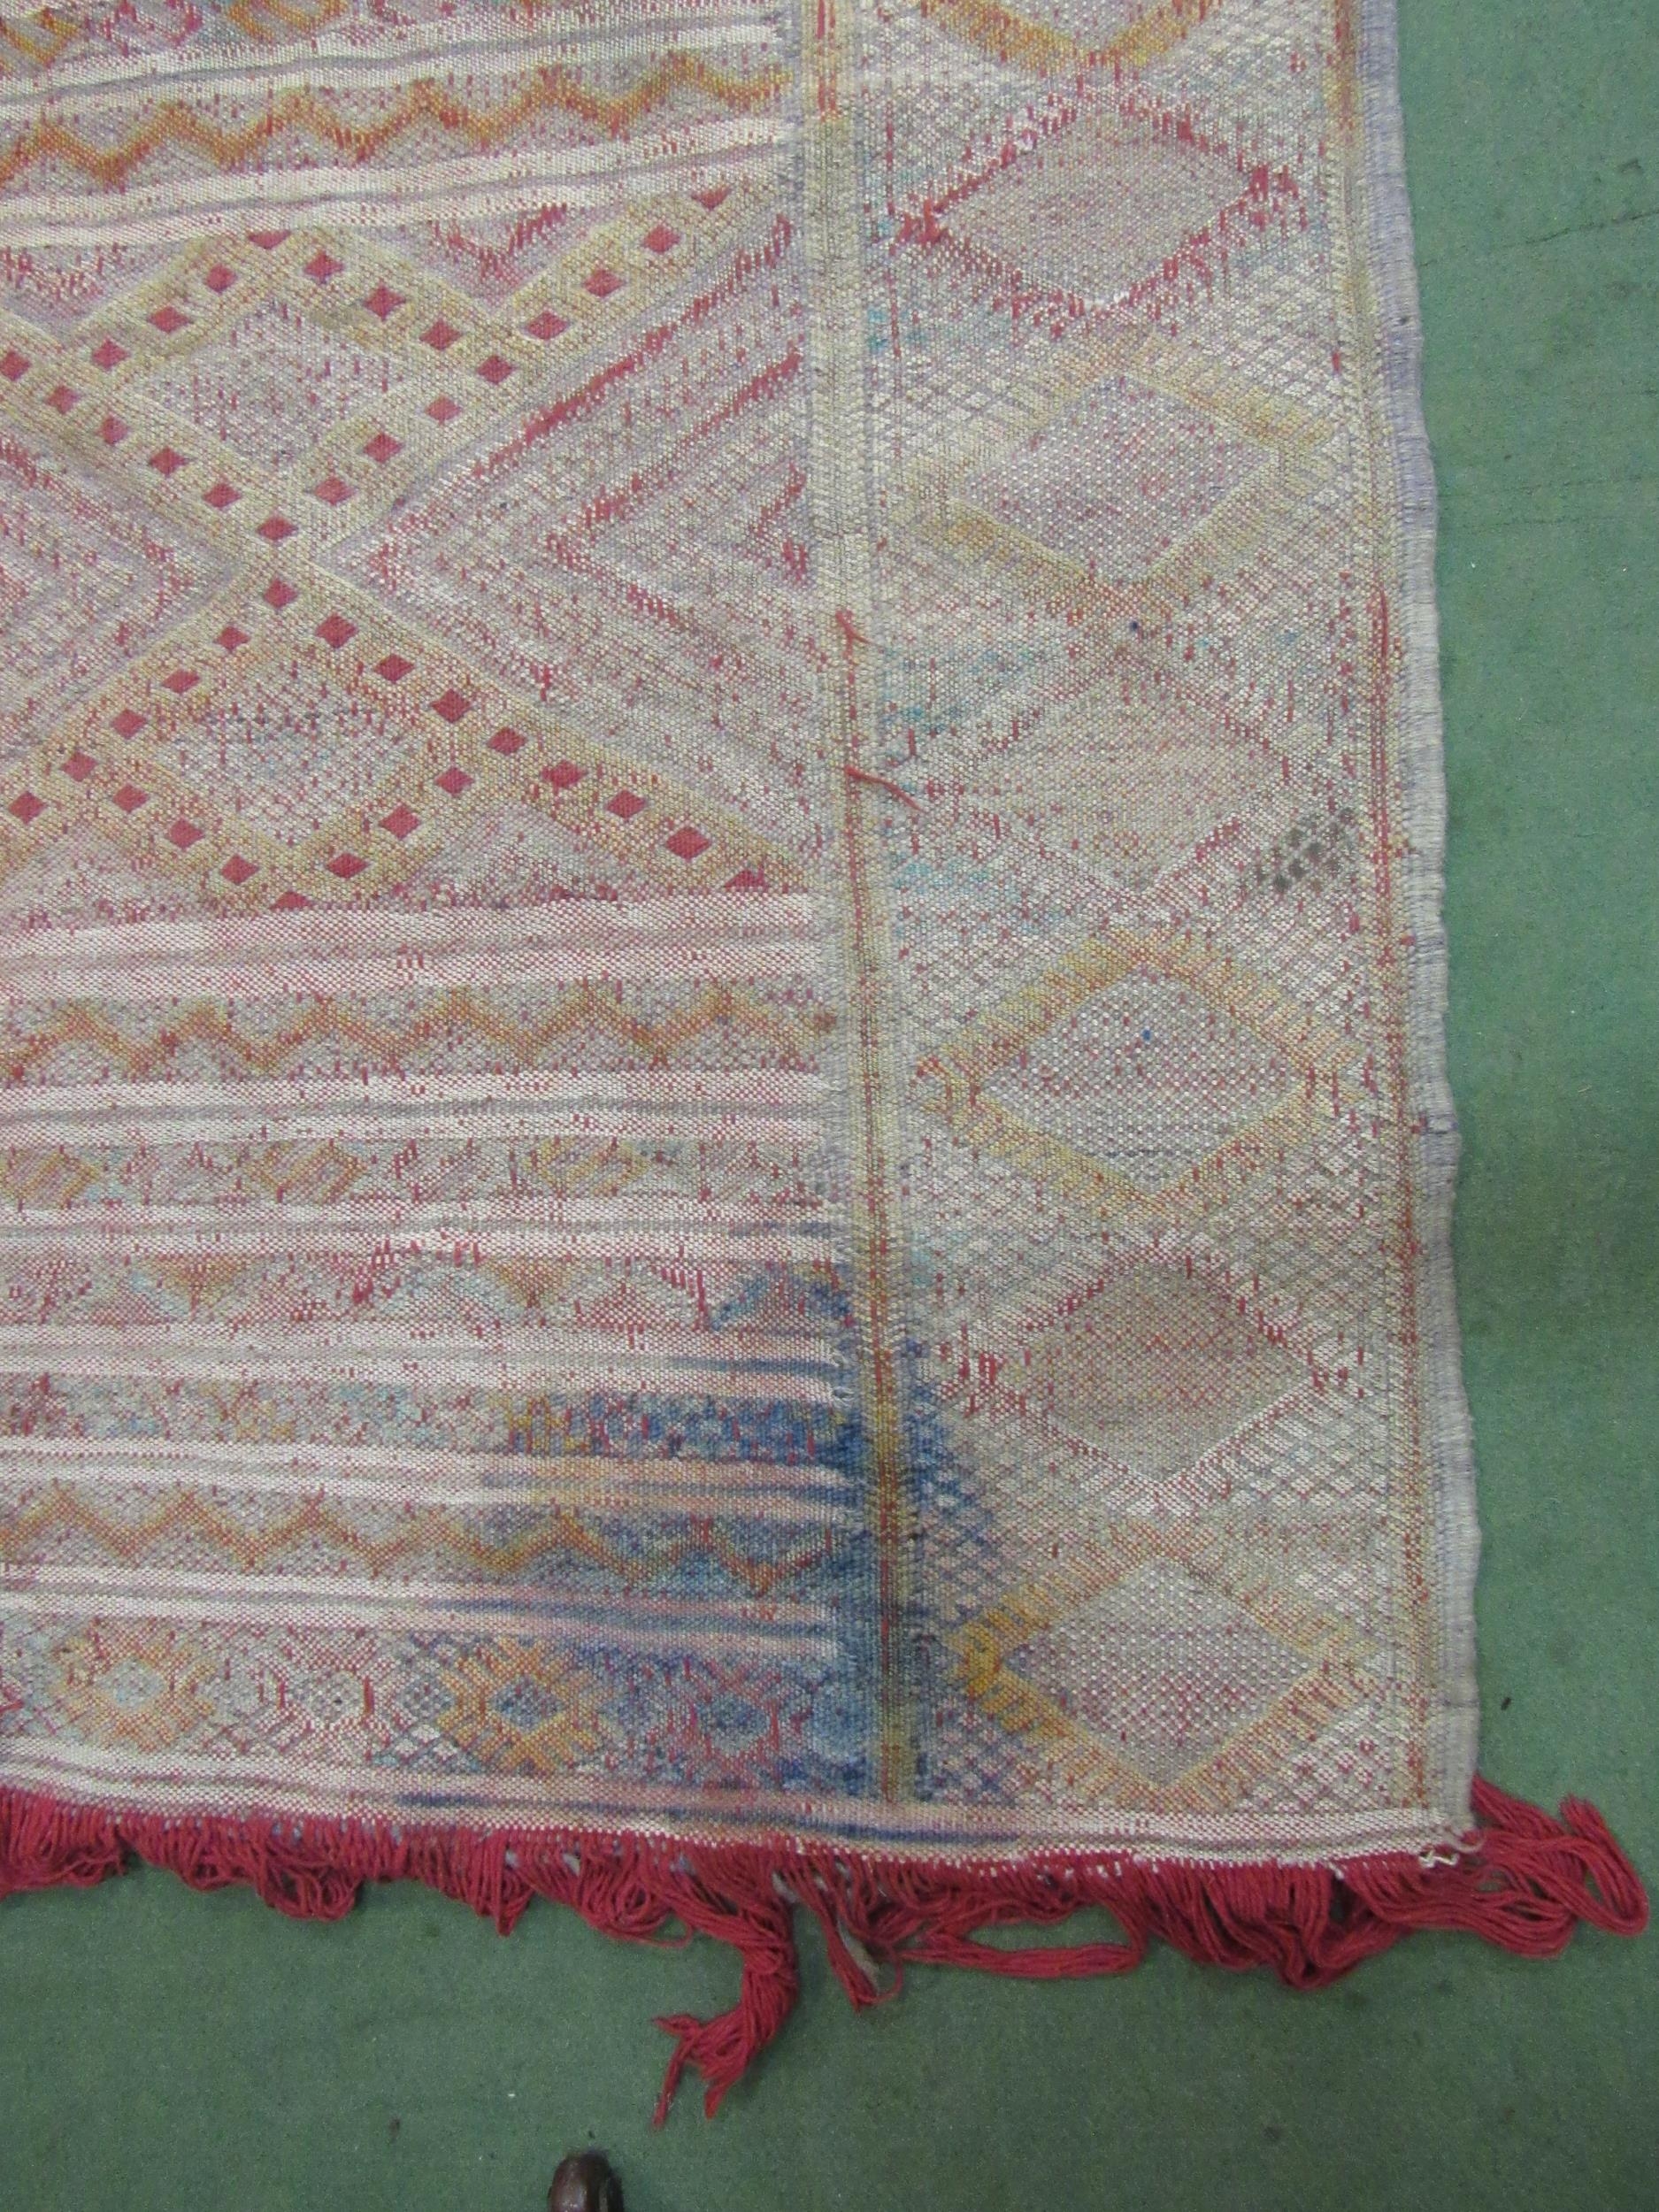 An Eastern hand woven geometric design rug, badly stained, a/f, 316cm x 178cm - Image 3 of 6